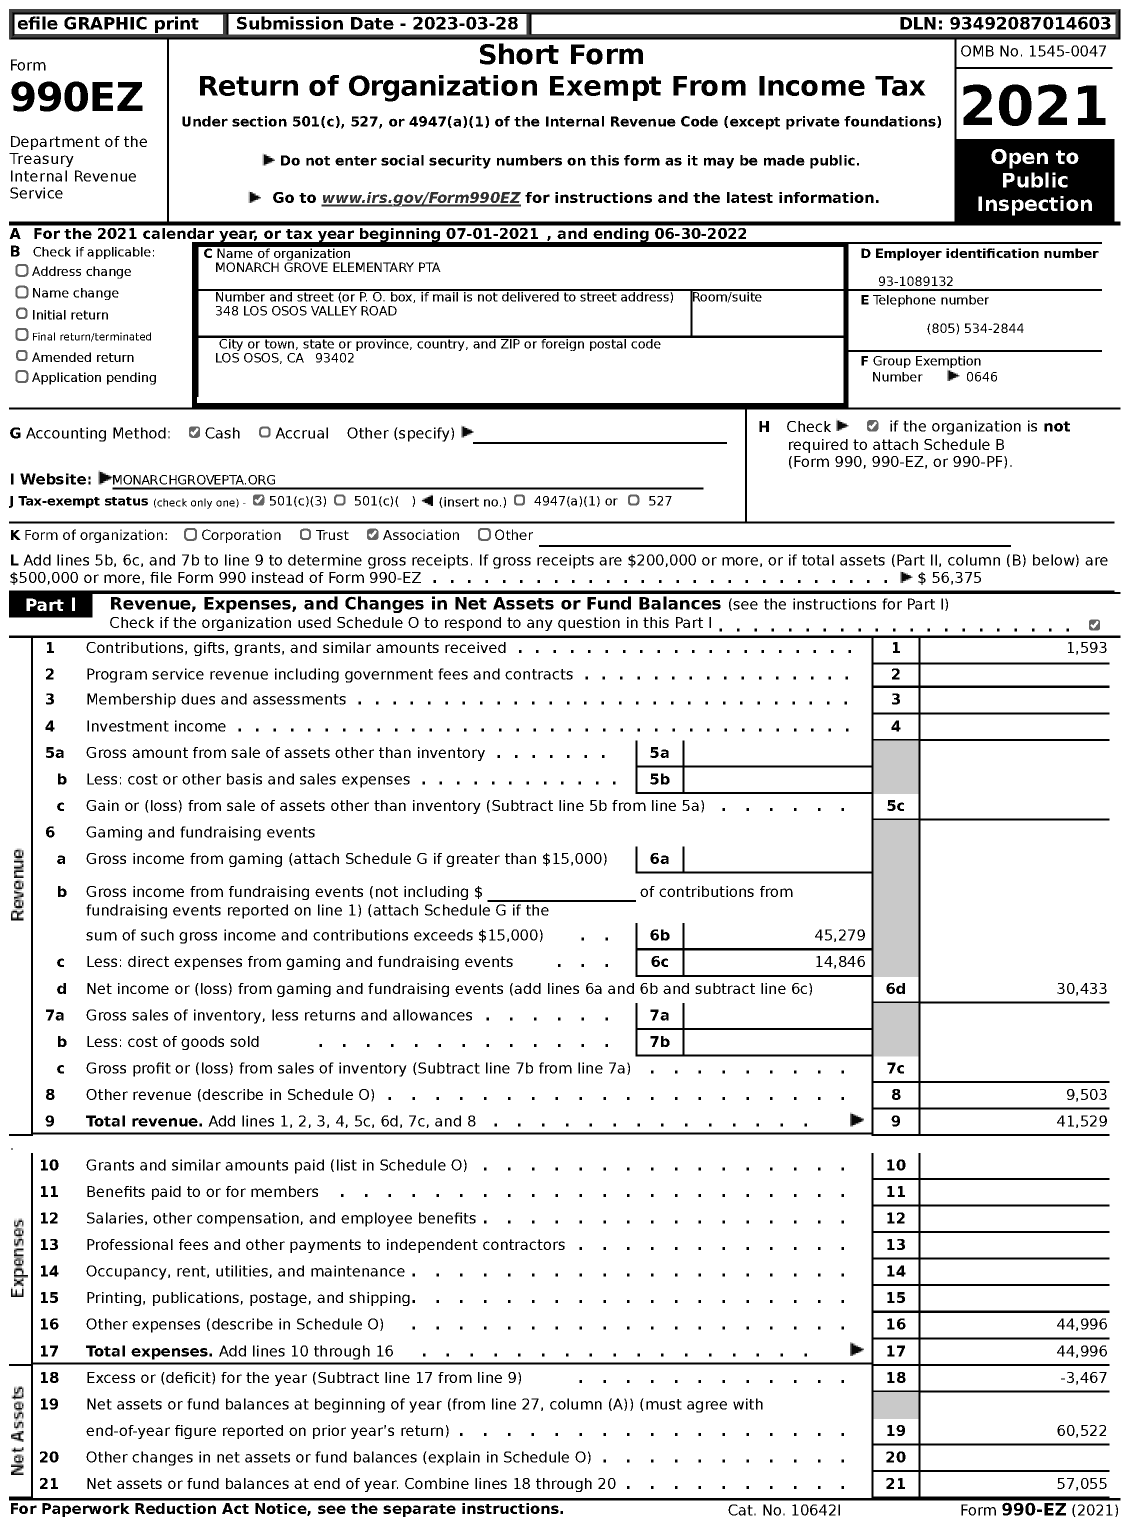 Image of first page of 2021 Form 990EZ for California State PTA - 4747 Monarch Grove Elementary PTA